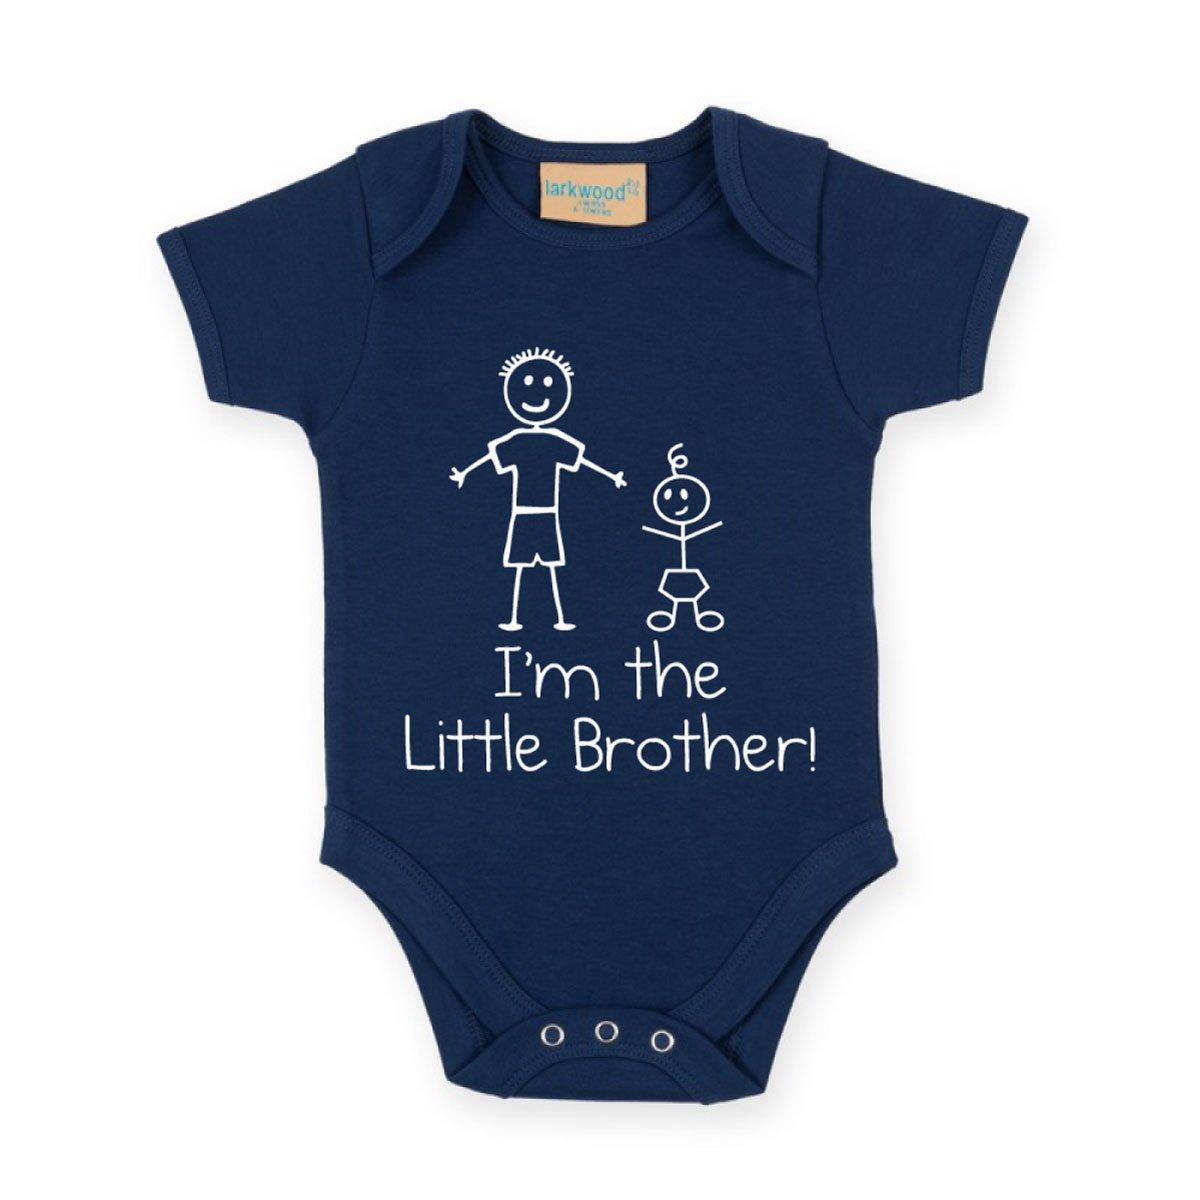 I’m The Little Brother Baby Grow